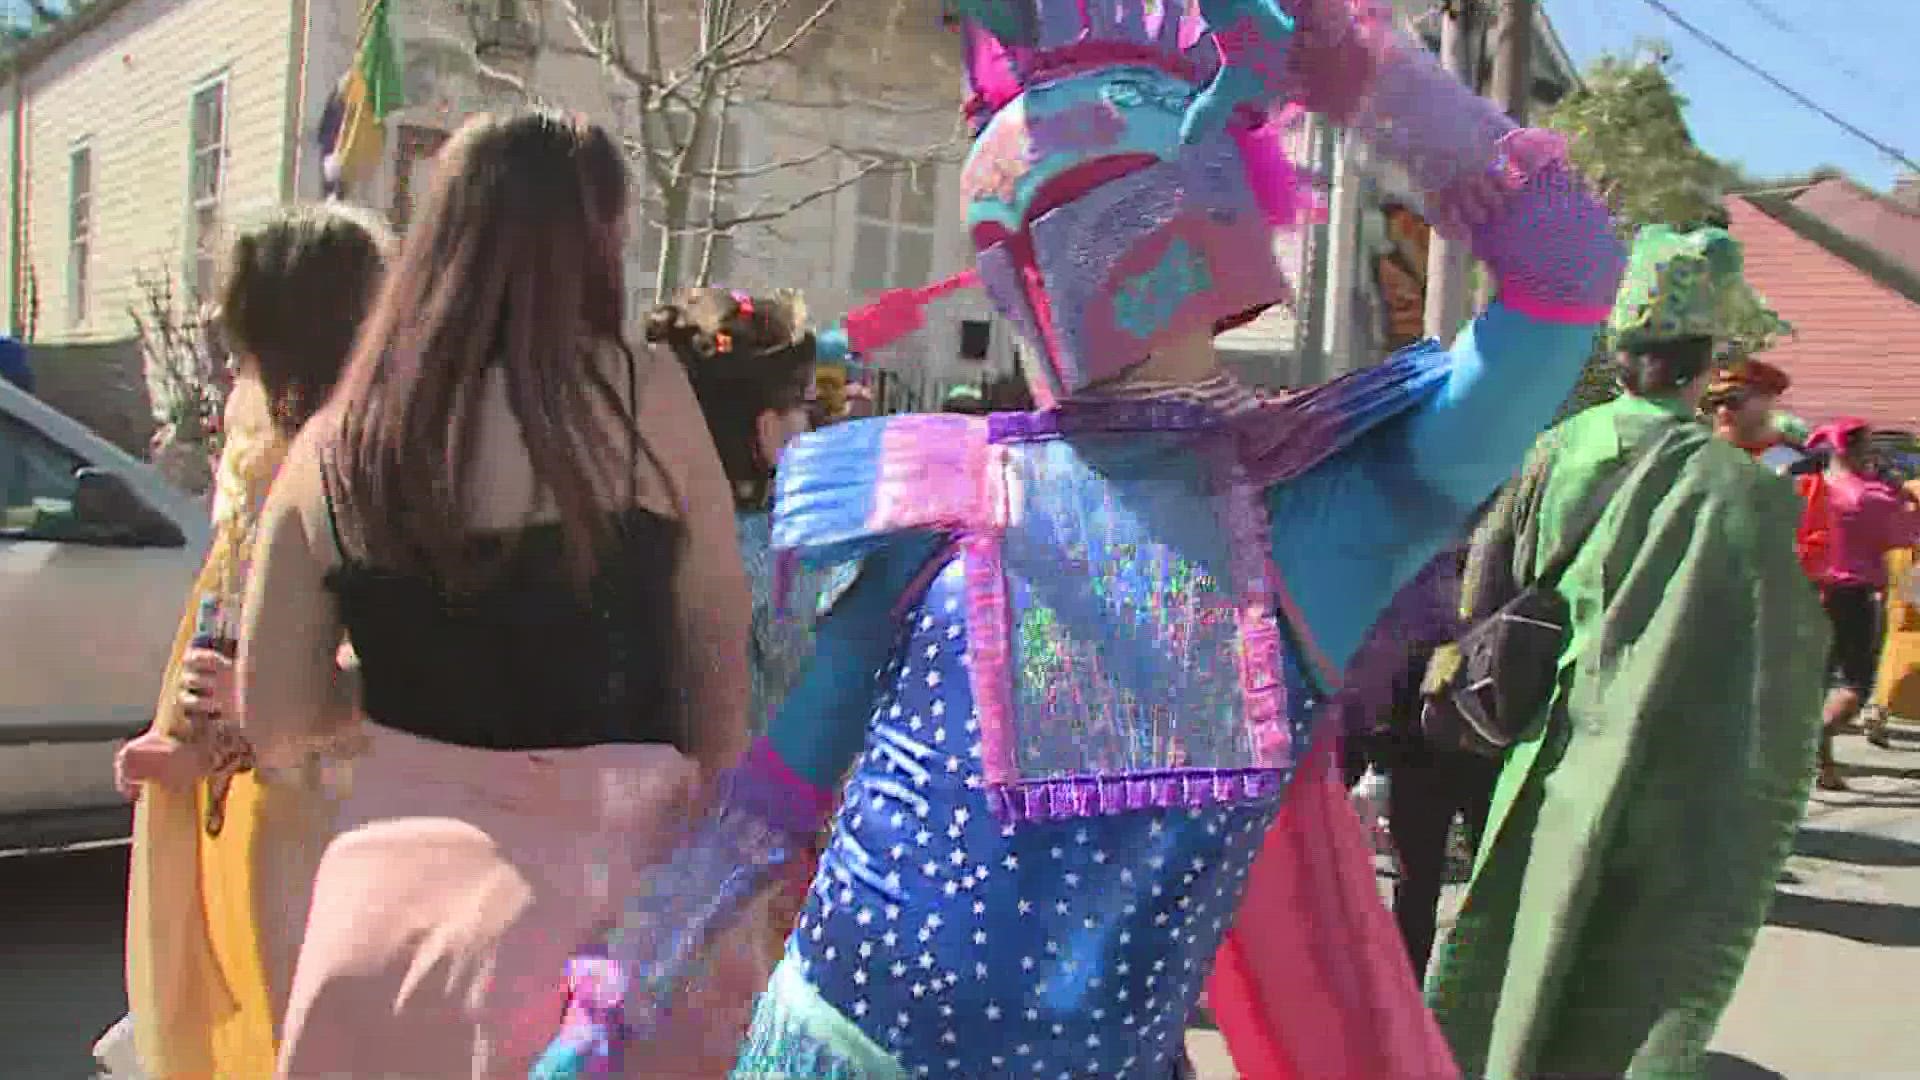 Biggest party in the world Mardi Gras returns for New Orleans wwltv